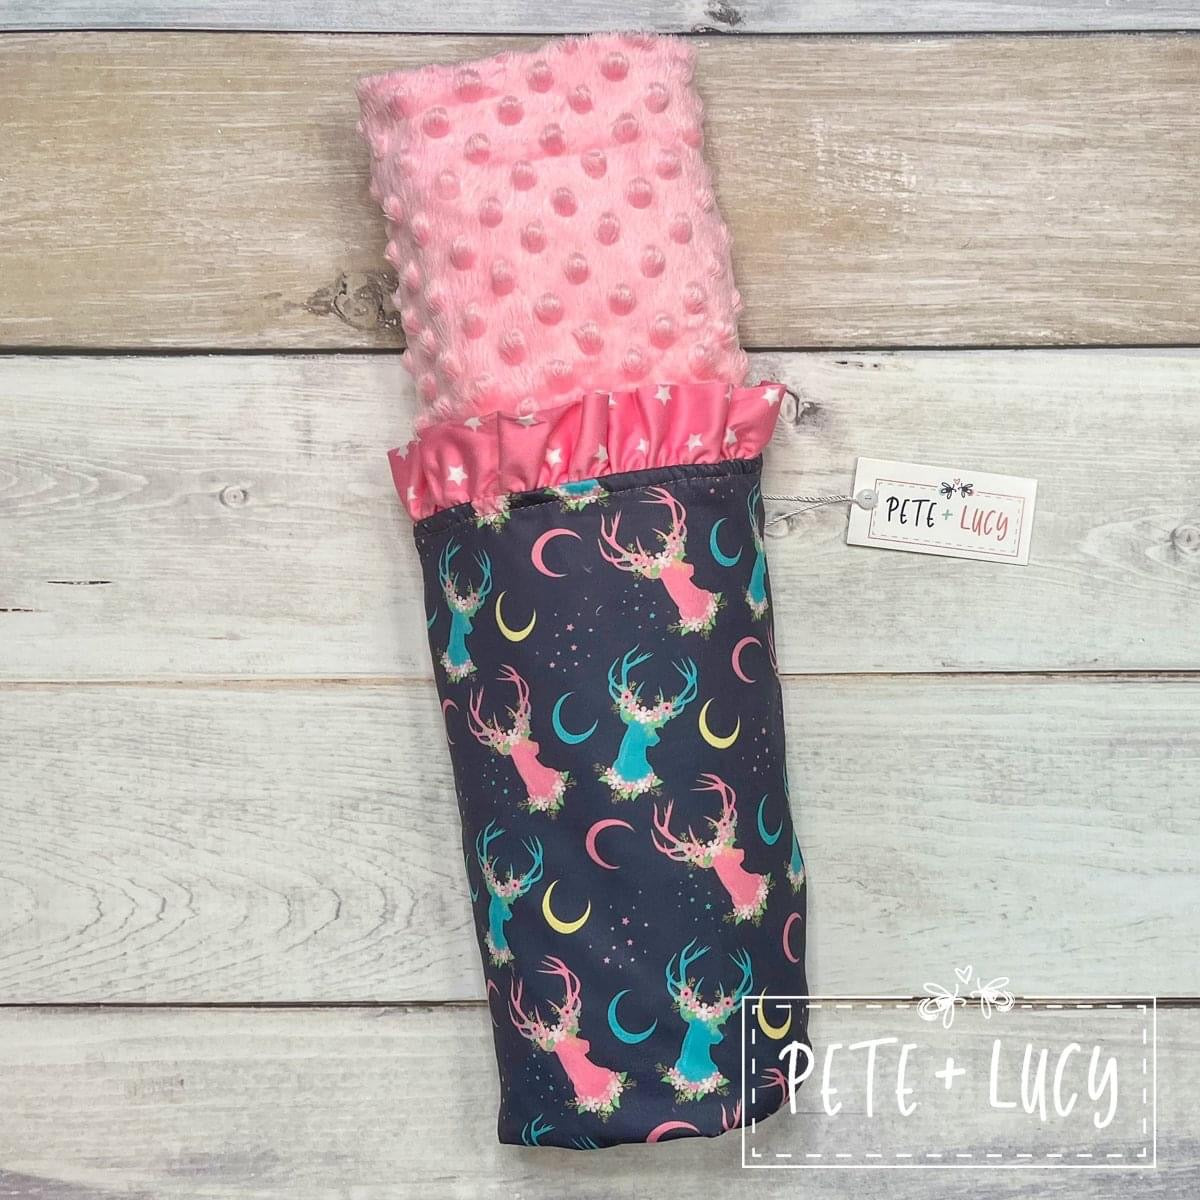 Starry Deer Minky Dot Blanket by Pete and Lucy